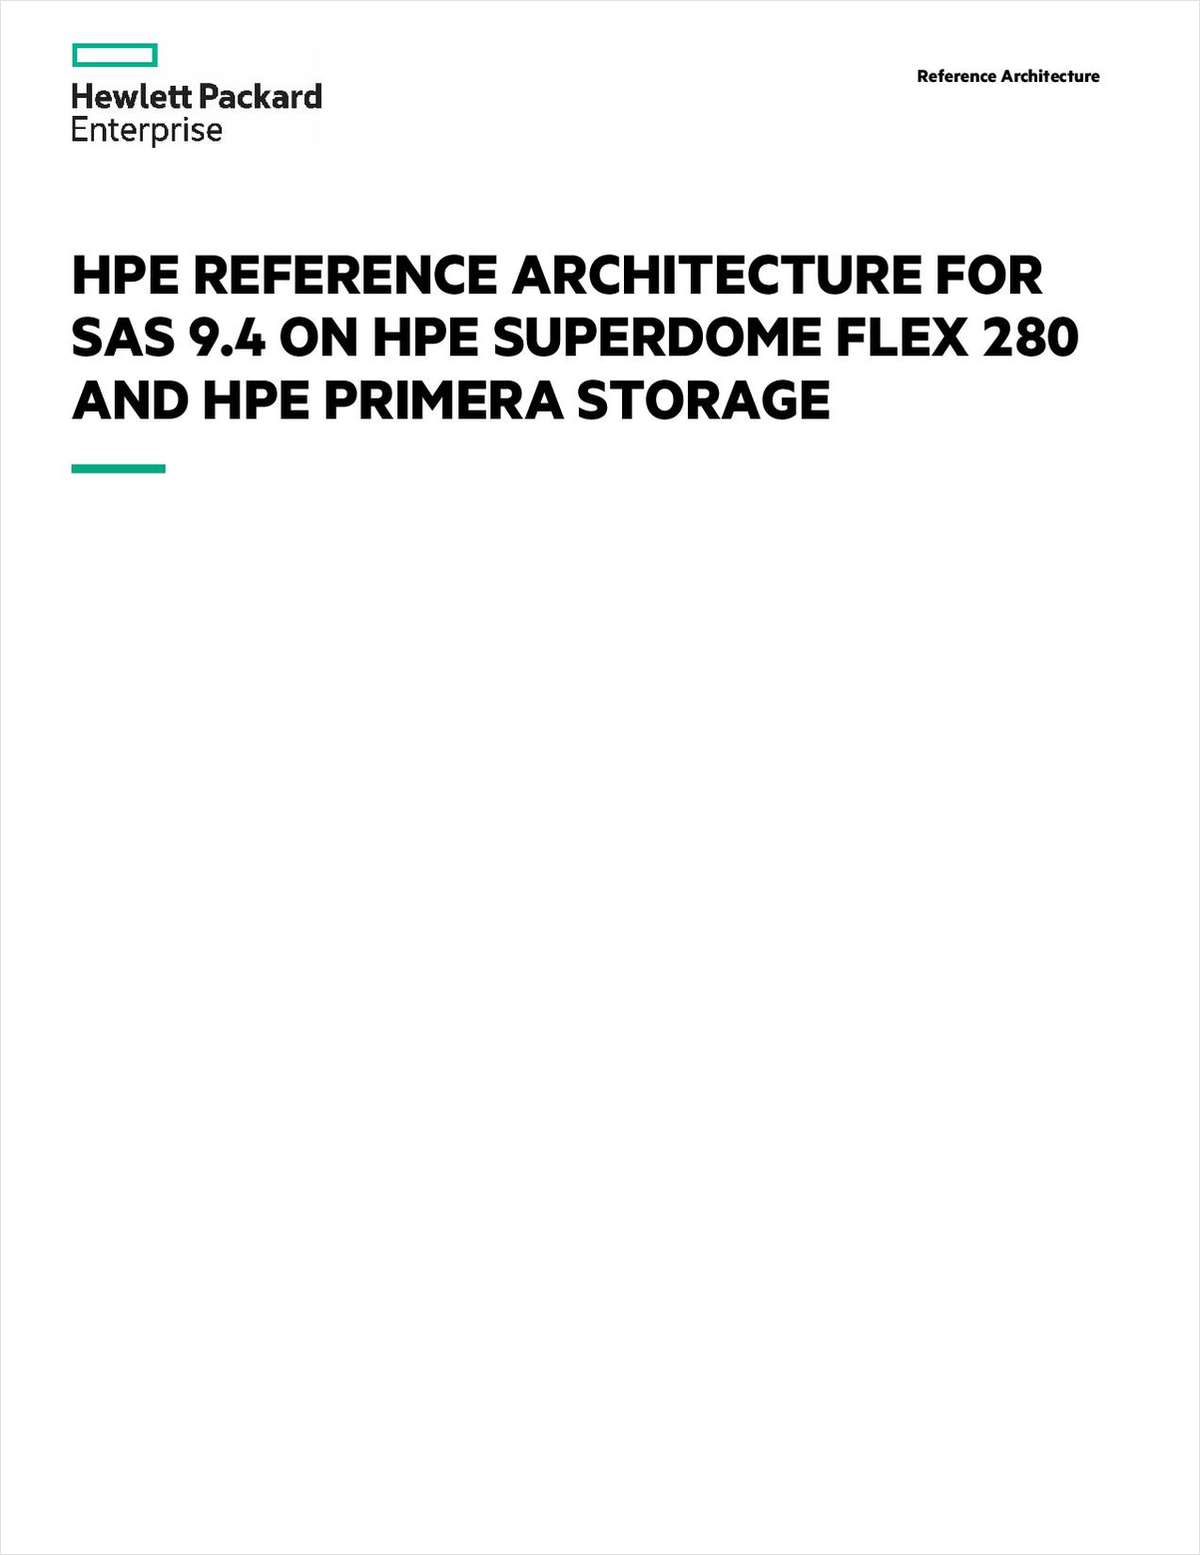 HPE Reference Architecture for SAS 9.4 on HPE Superdome Flex 280 and HPE Primera Storage